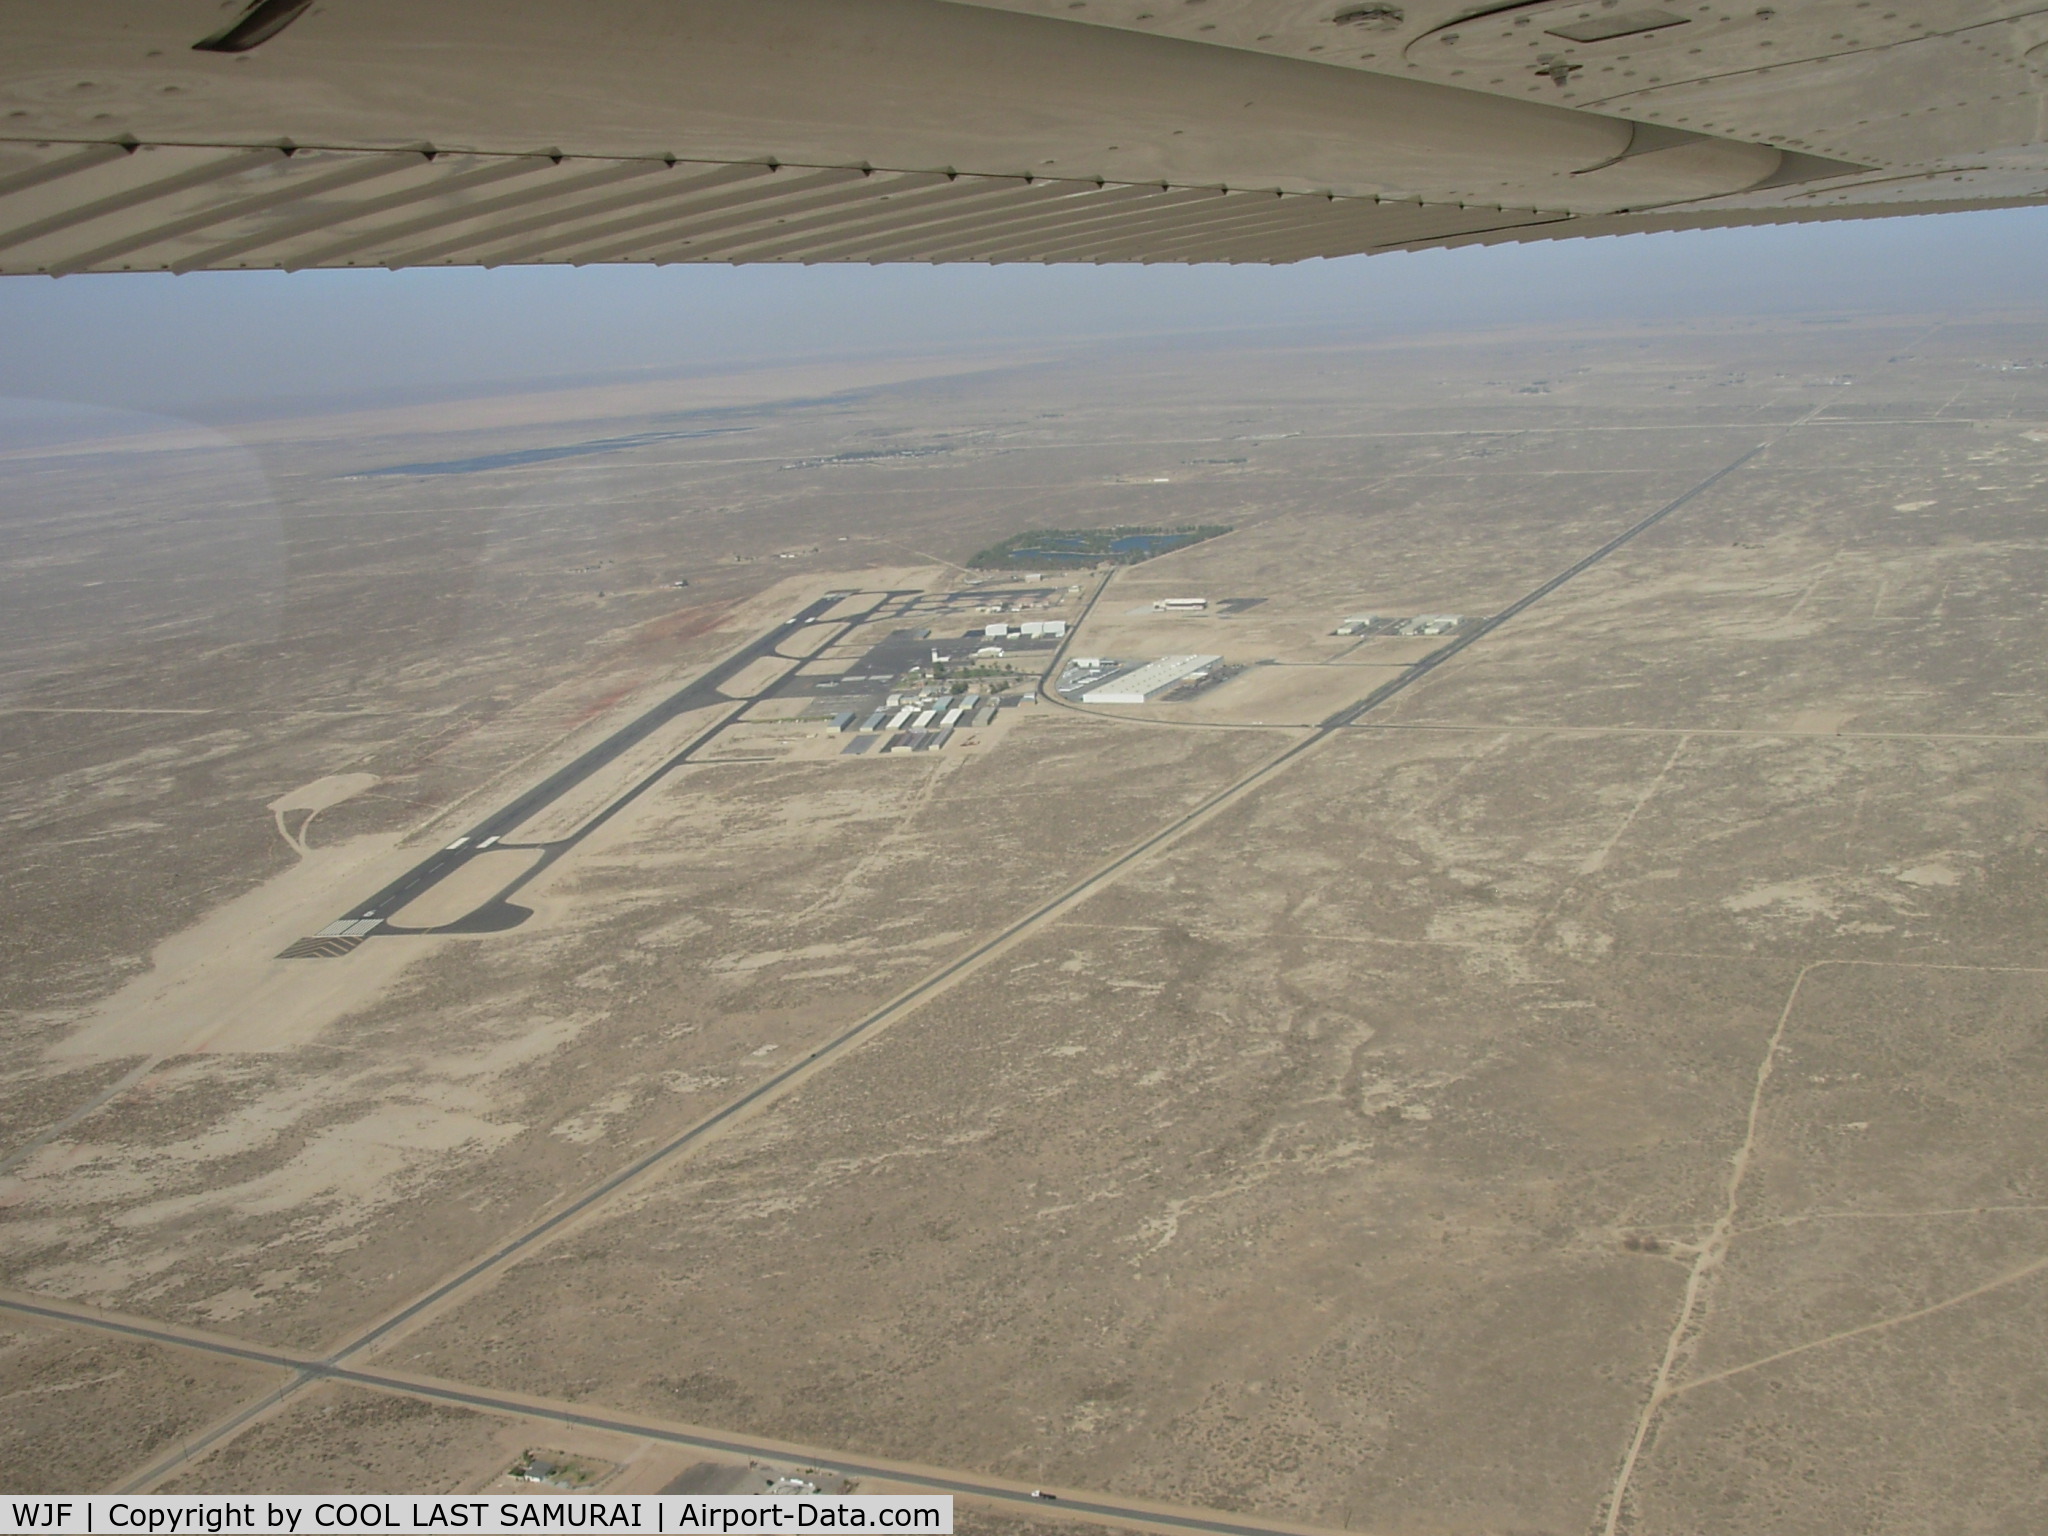 General Wm J Fox Airfield Airport (WJF) - WJF, A VIEW FROM LEFT DOWNWIND DEPARTURE